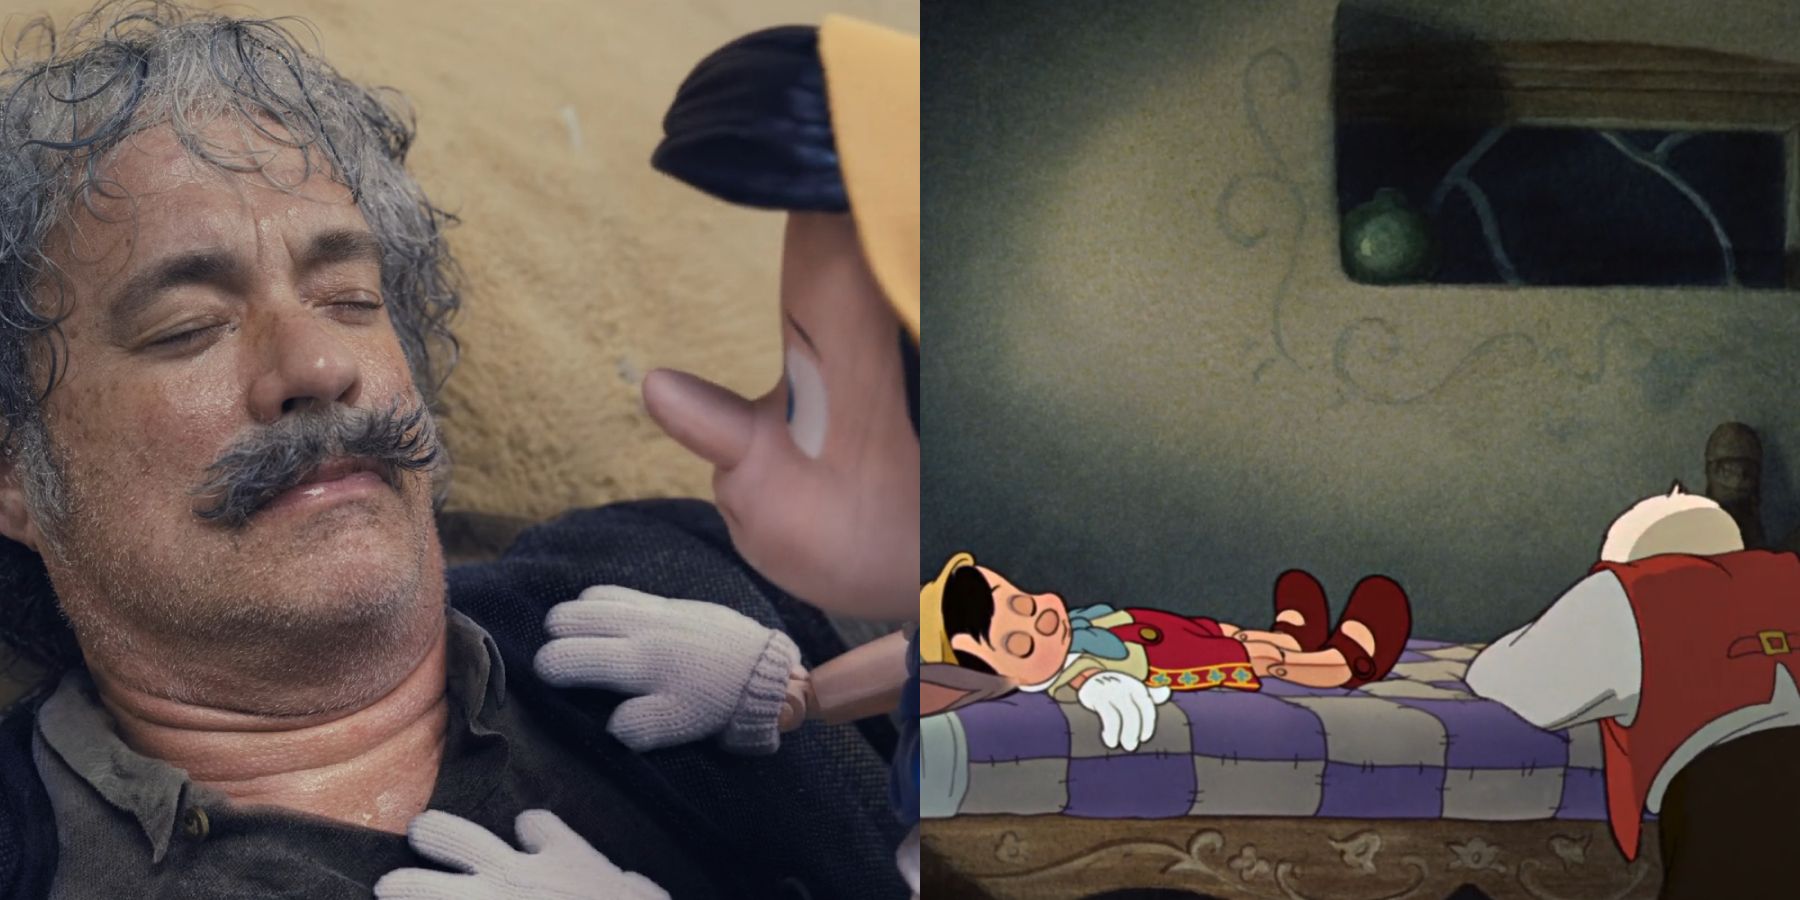 Geppetto drowns in the remake and Pinocchio drowns in the original